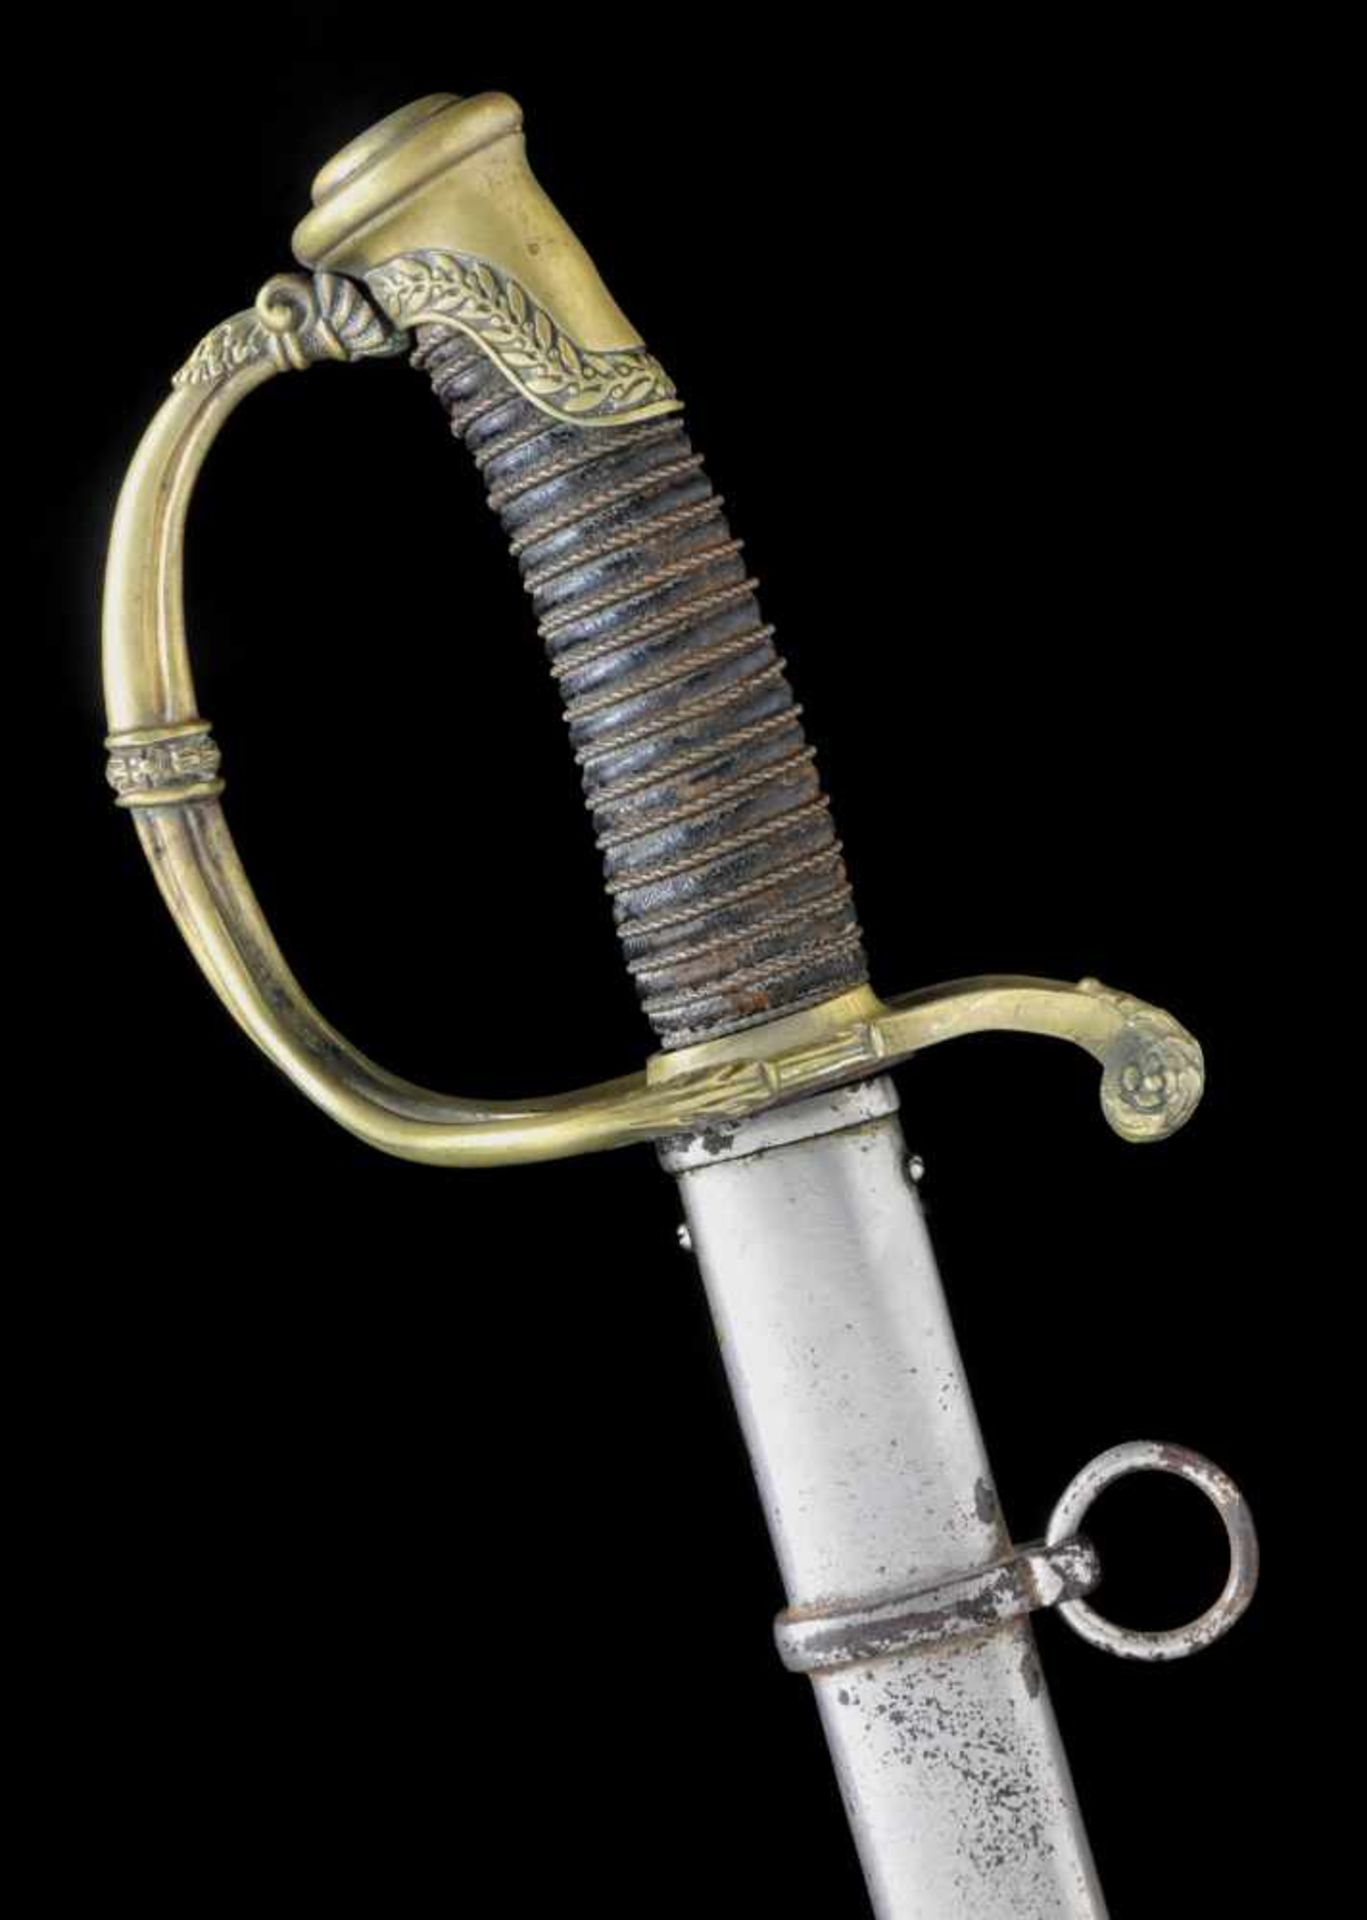 A FRENCH M1821 INFANTRY OFFICER’S SWORD WITH IMPORTED GERMAN BLADE BY CARL EICKHORN. Origin: France,